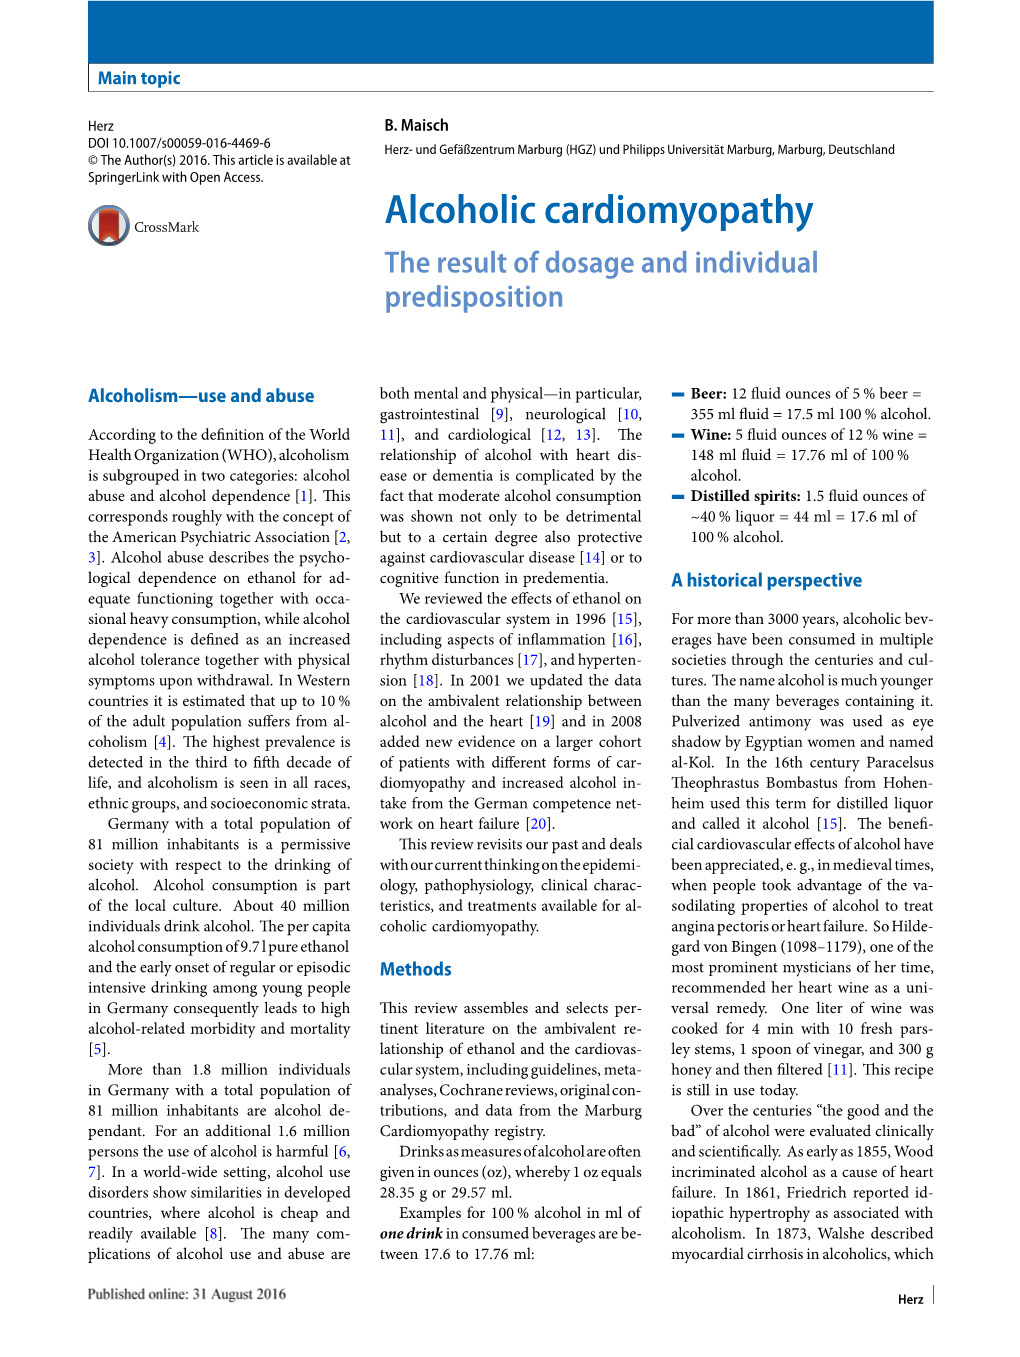 Alcoholic Cardiomyopathy the Result of Dosage and Individual Predisposition